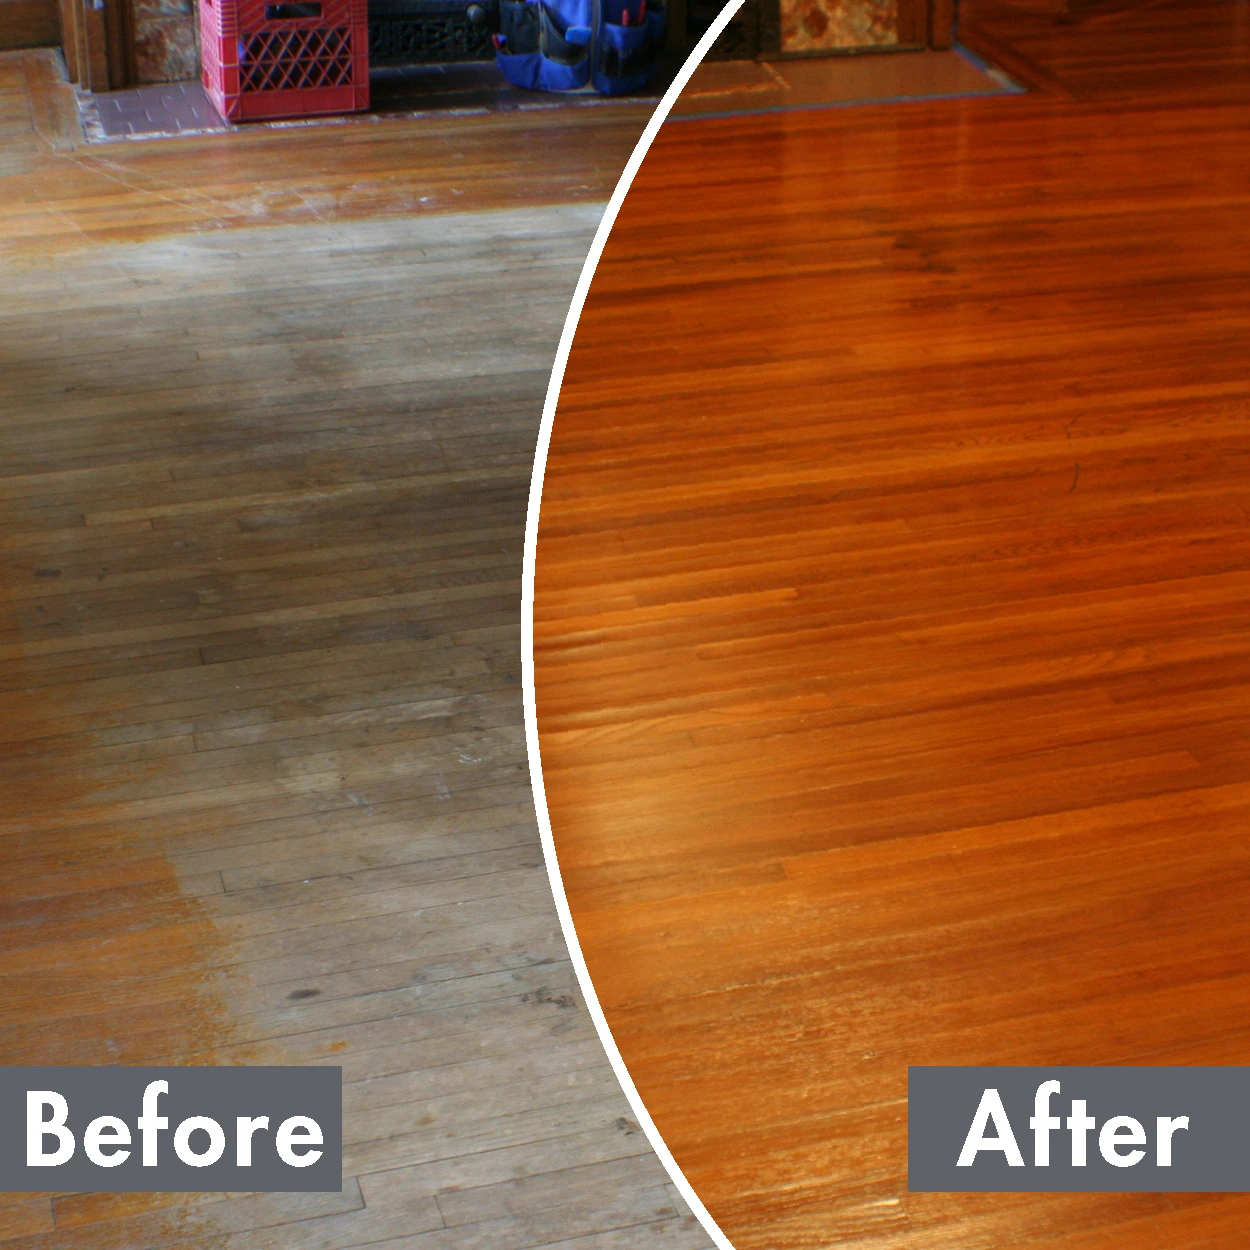 On the left, a worn hardwood floor with discoloration and signs of heavy foot traffic. On the right, the same floor looks brand new after N-Hance hardwood floor refinishing.